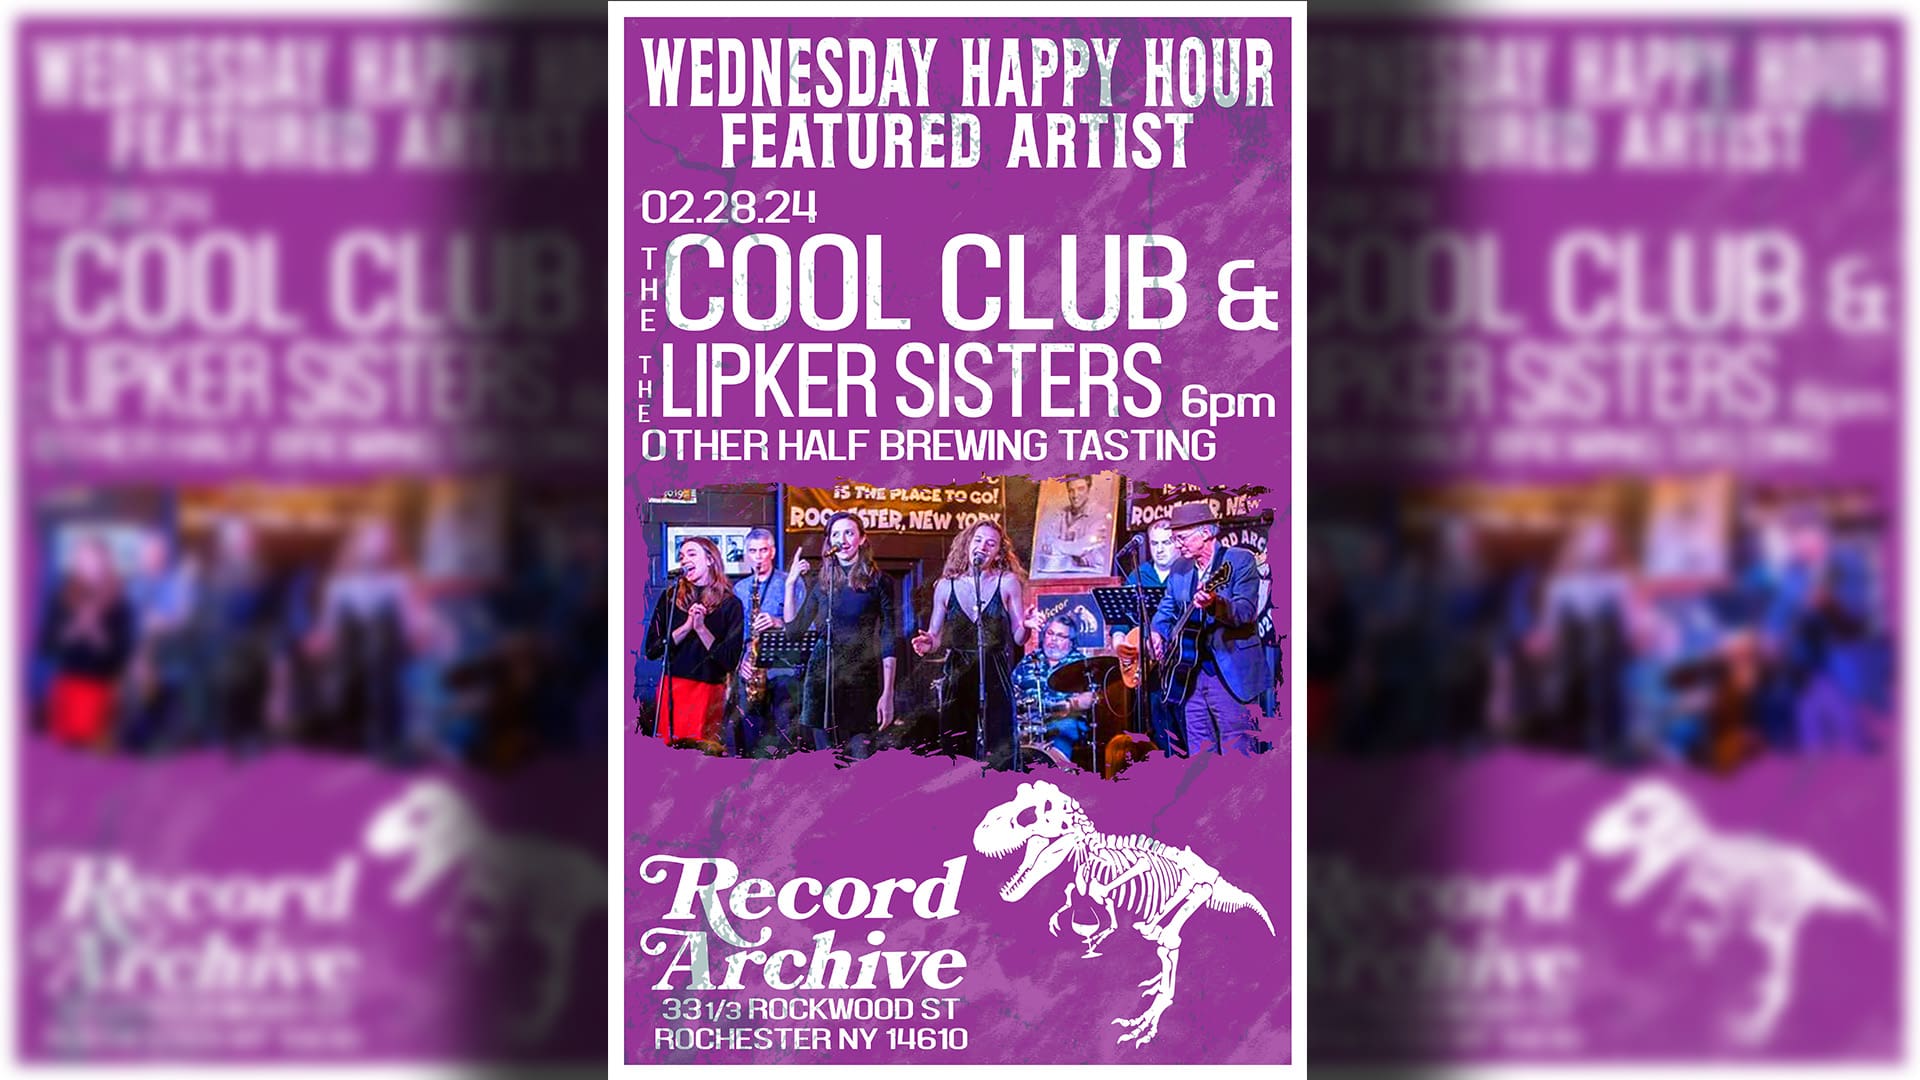 Wednesday Happy Hour. The Cool Club & The Lipker Sisters. 02.28.24 Record Archive. 33 1/3 Rockwood St Rochester NY 14610.